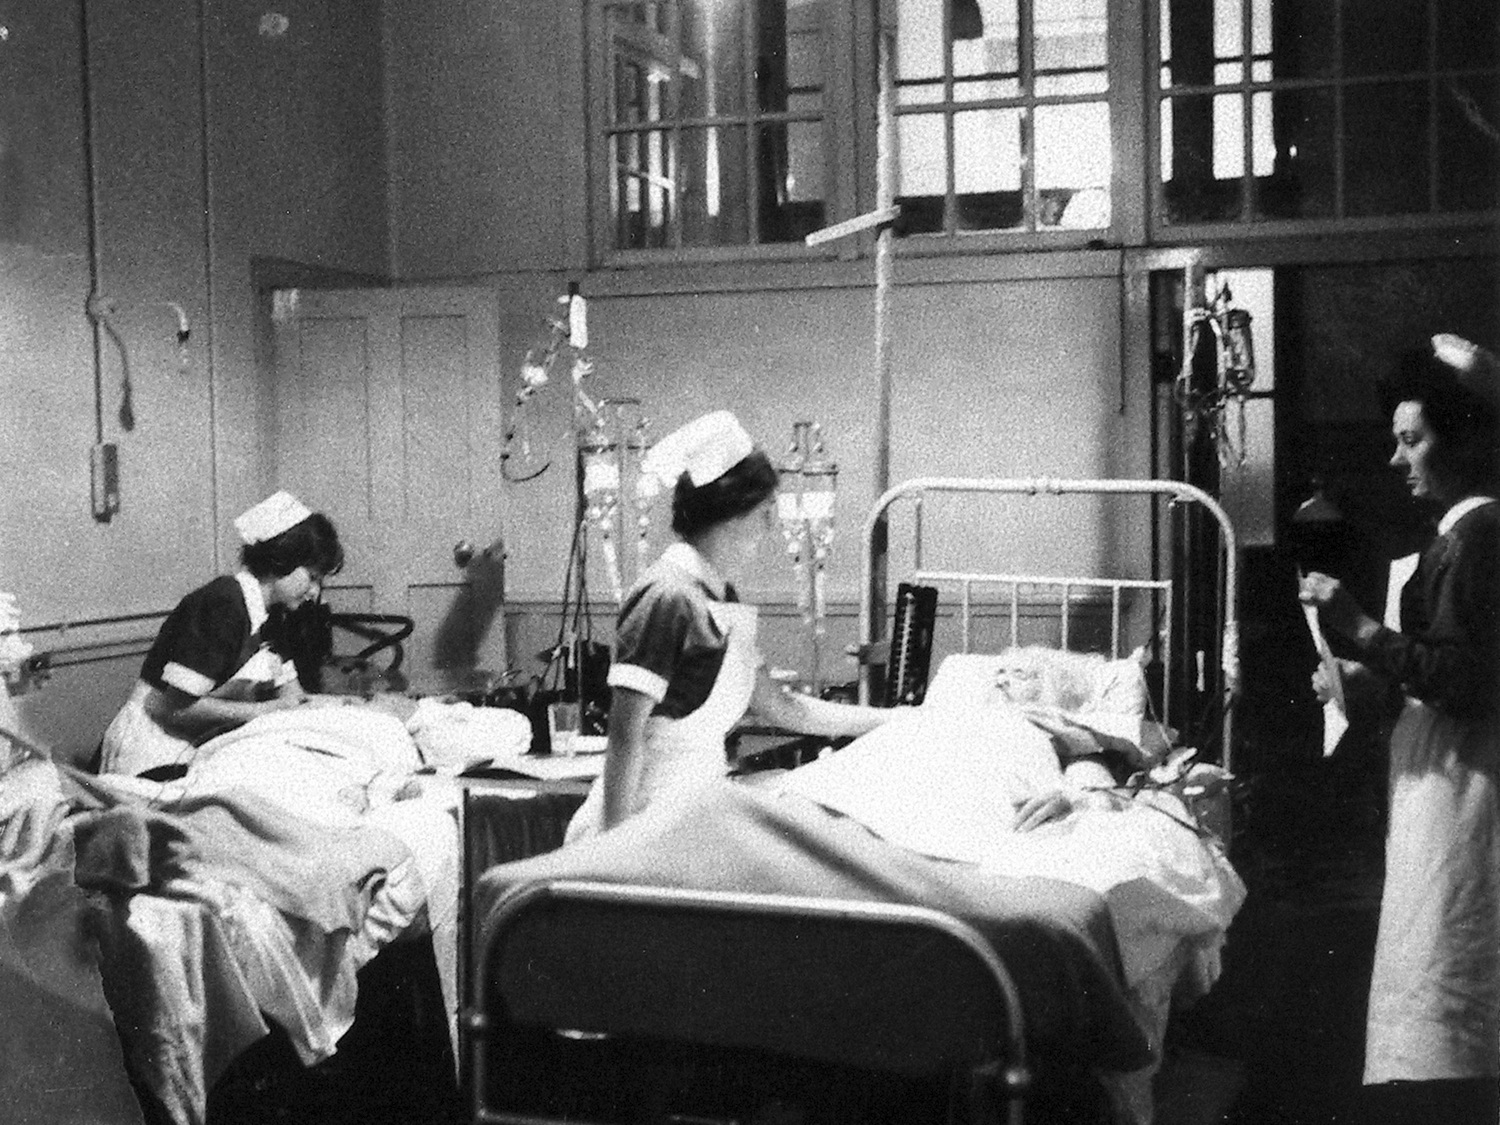 Intravenous infusions in Edinburgh Royal Infirmary in the 1970s